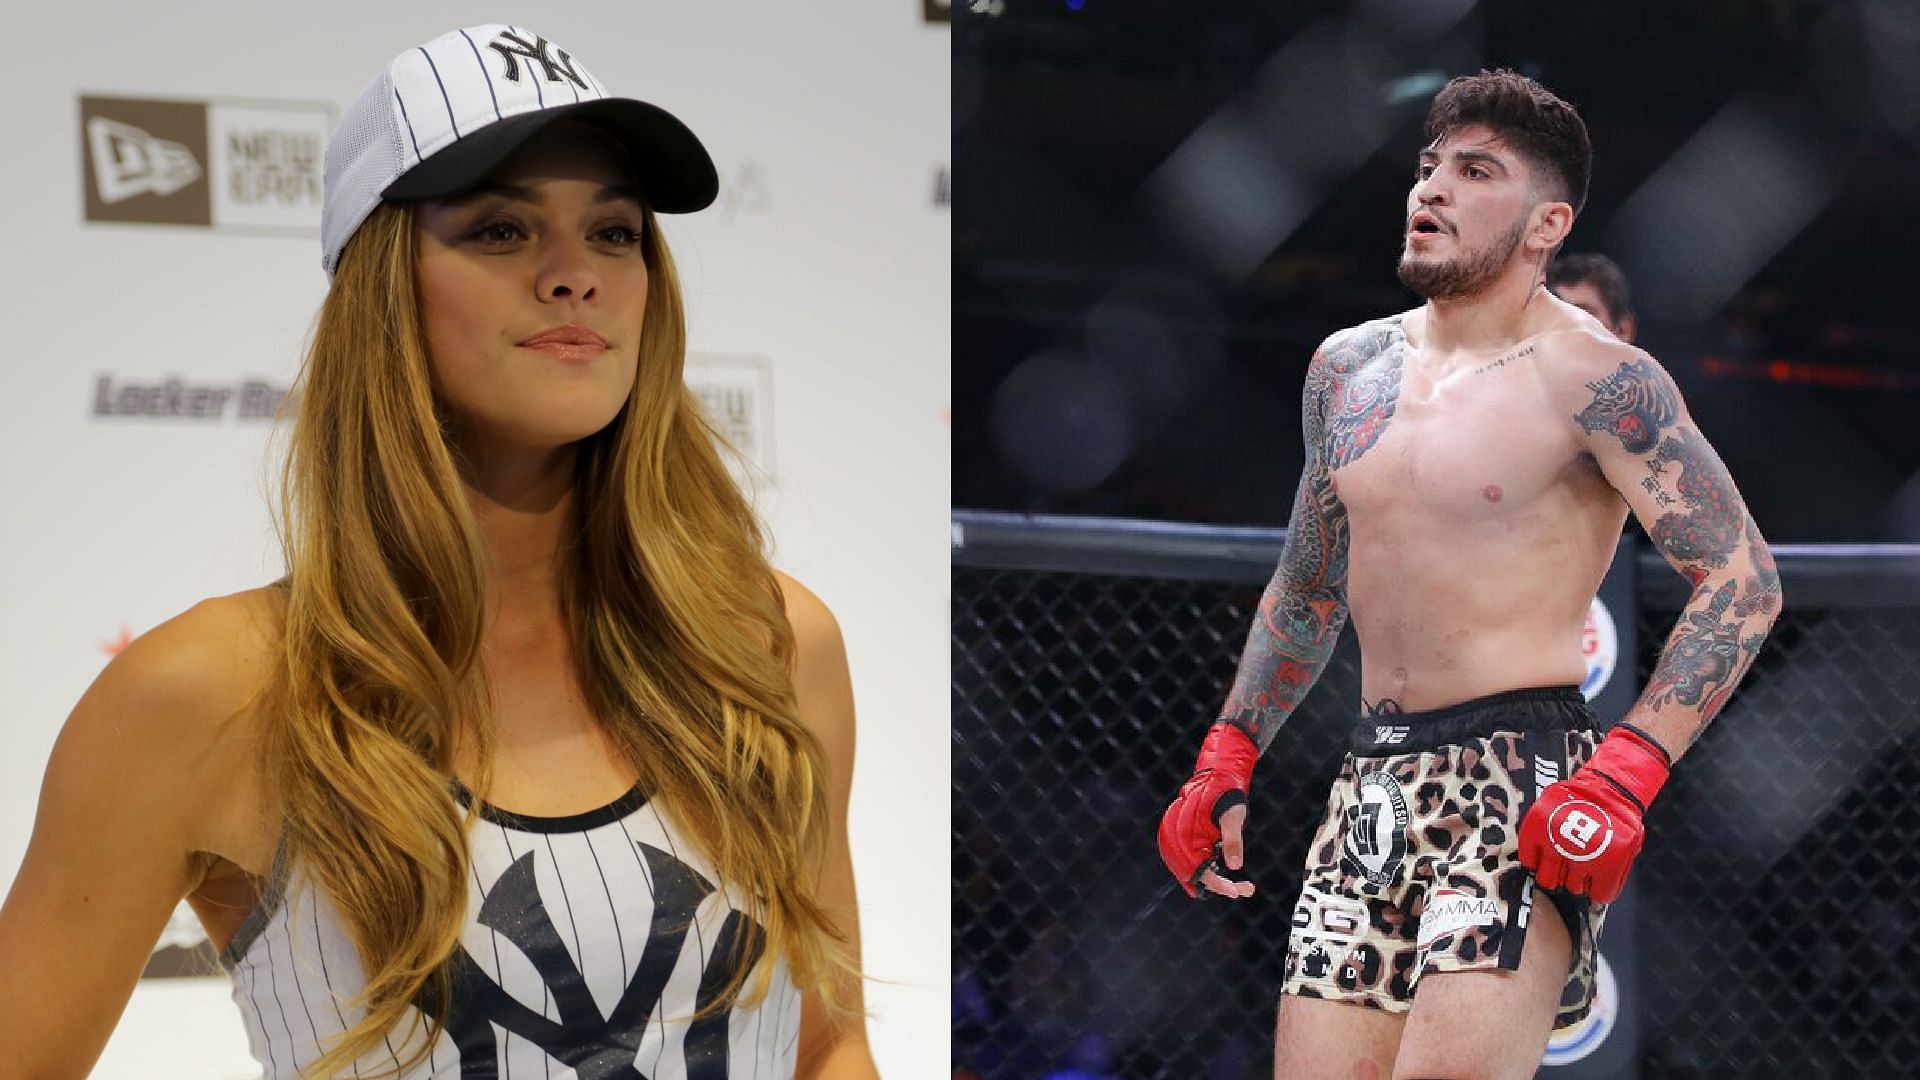 Nina Agdal is apparently suing Dillon Danis in federal court (Image via Getty)